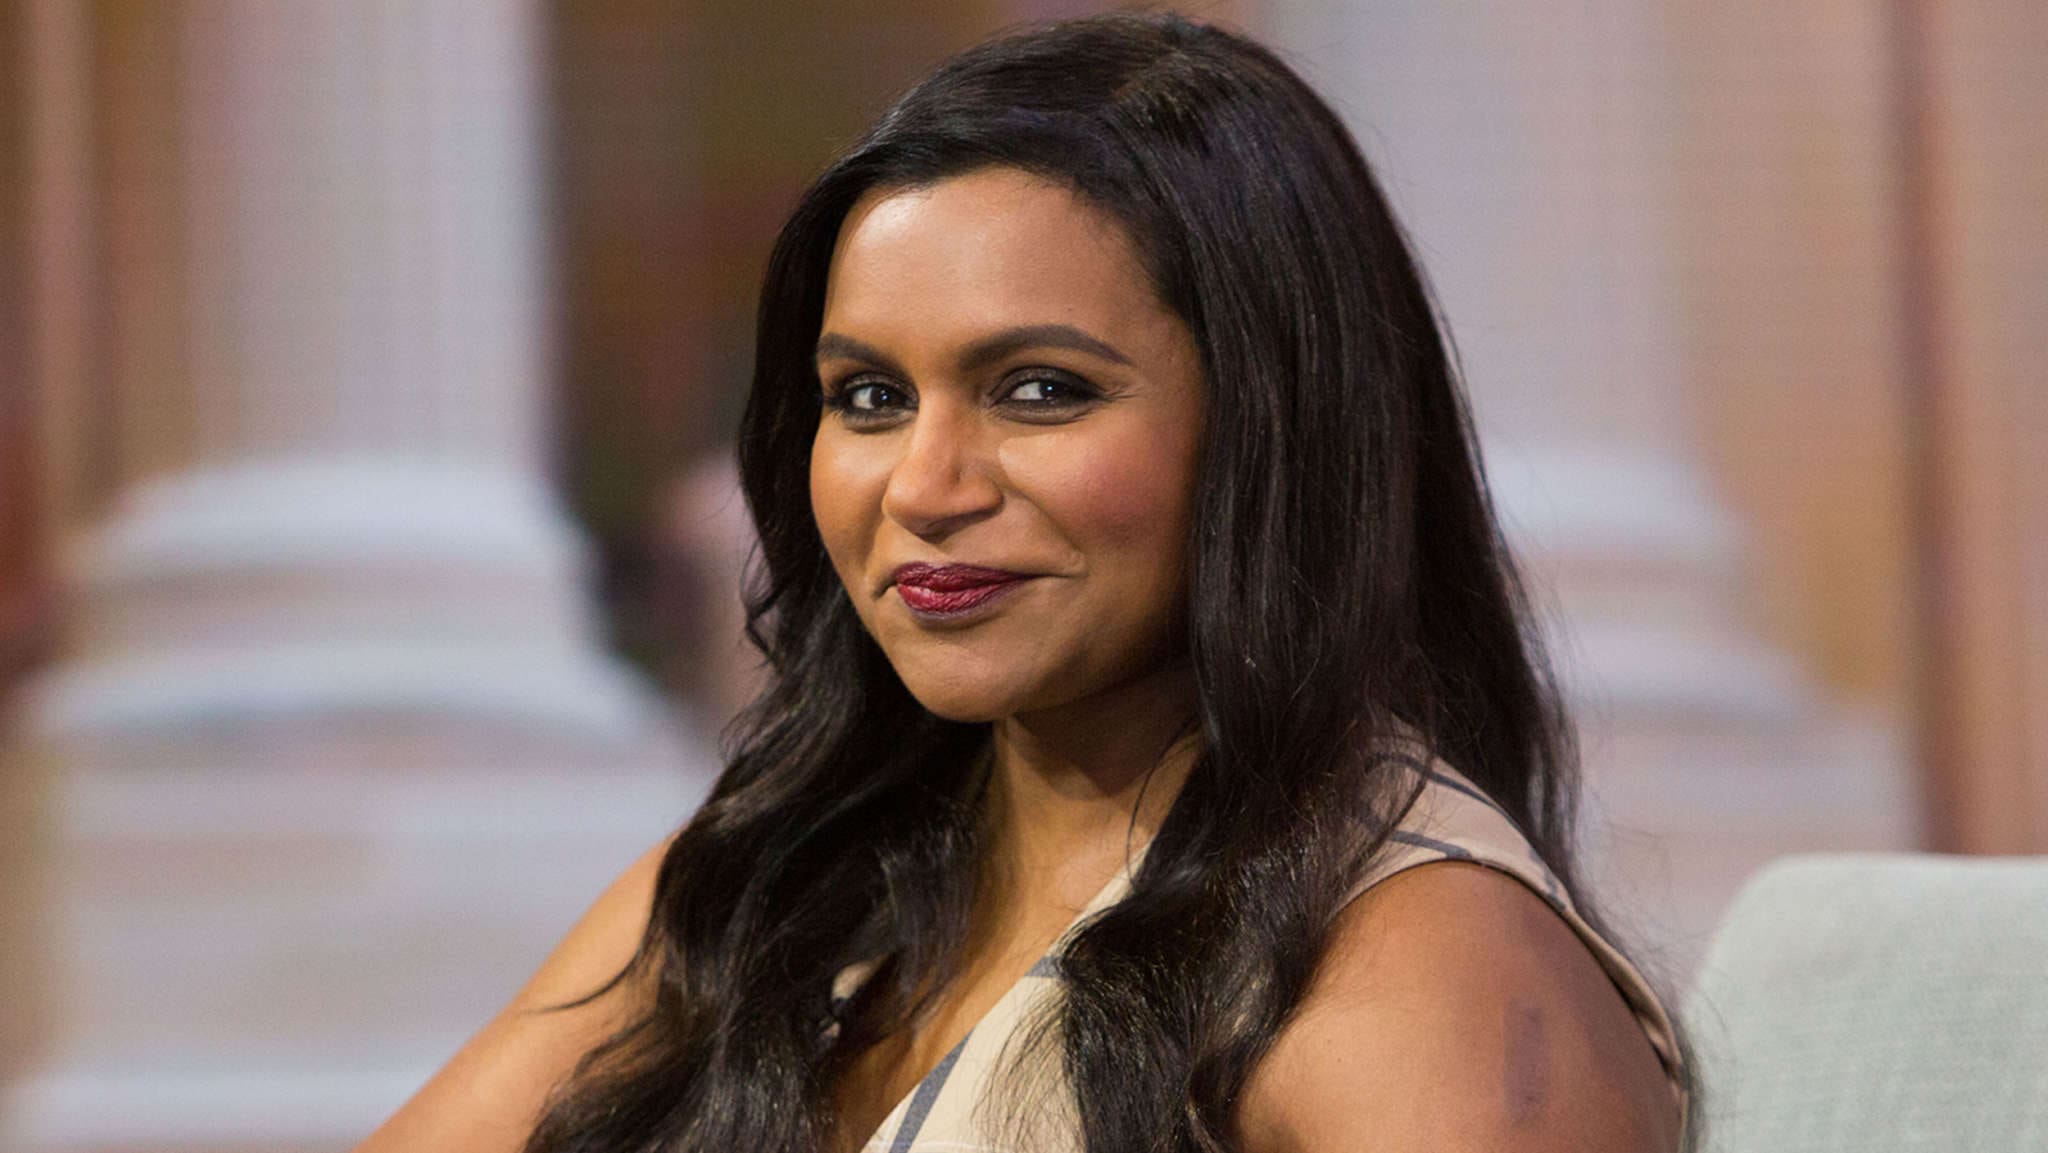 ”mindy-kaling-opens-up-about-working-hard-and-being-a-new-mother-at-the-same-time”